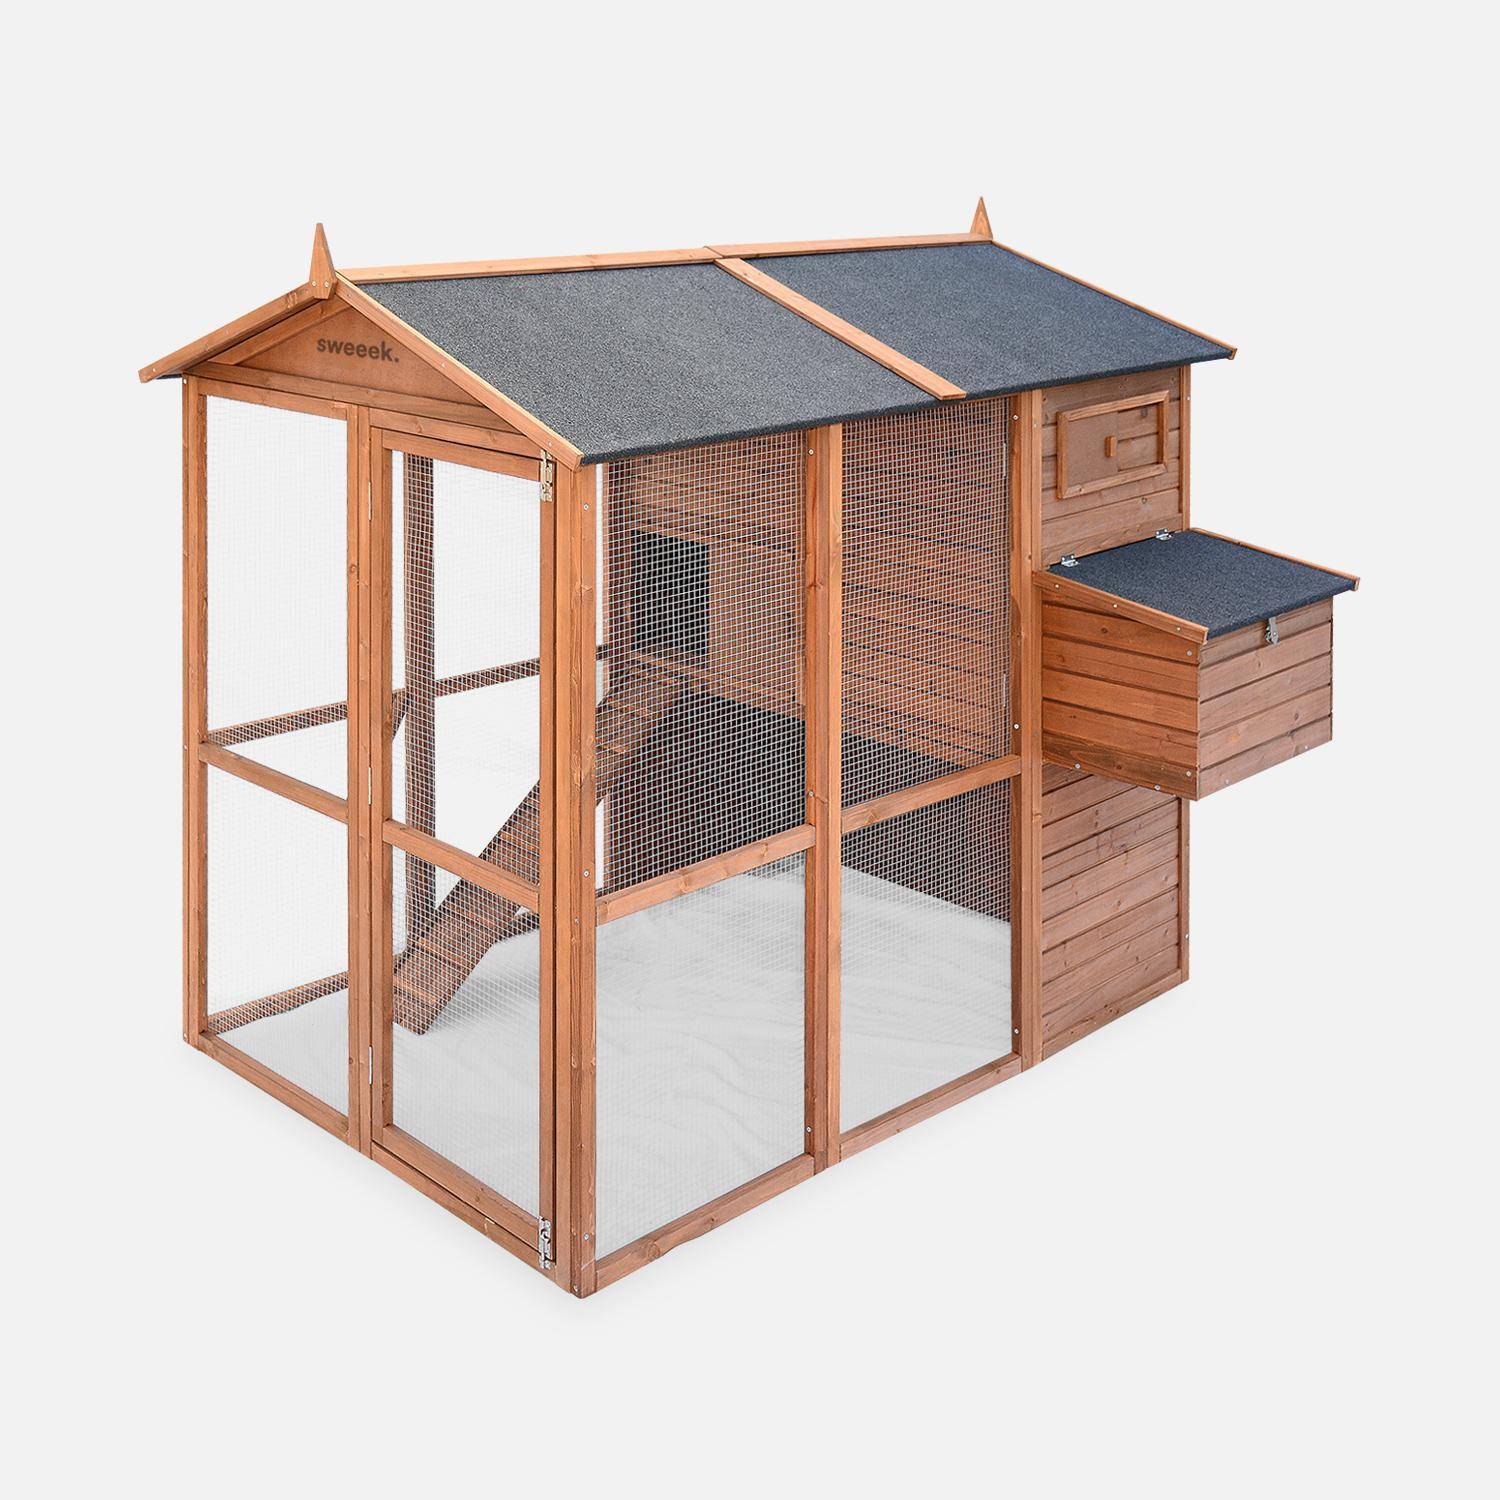 Wooden chicken coop - backyard hen cage for 6 to 8 chickens, indoor and outdoor space - Cotentine - Wood colour Photo4